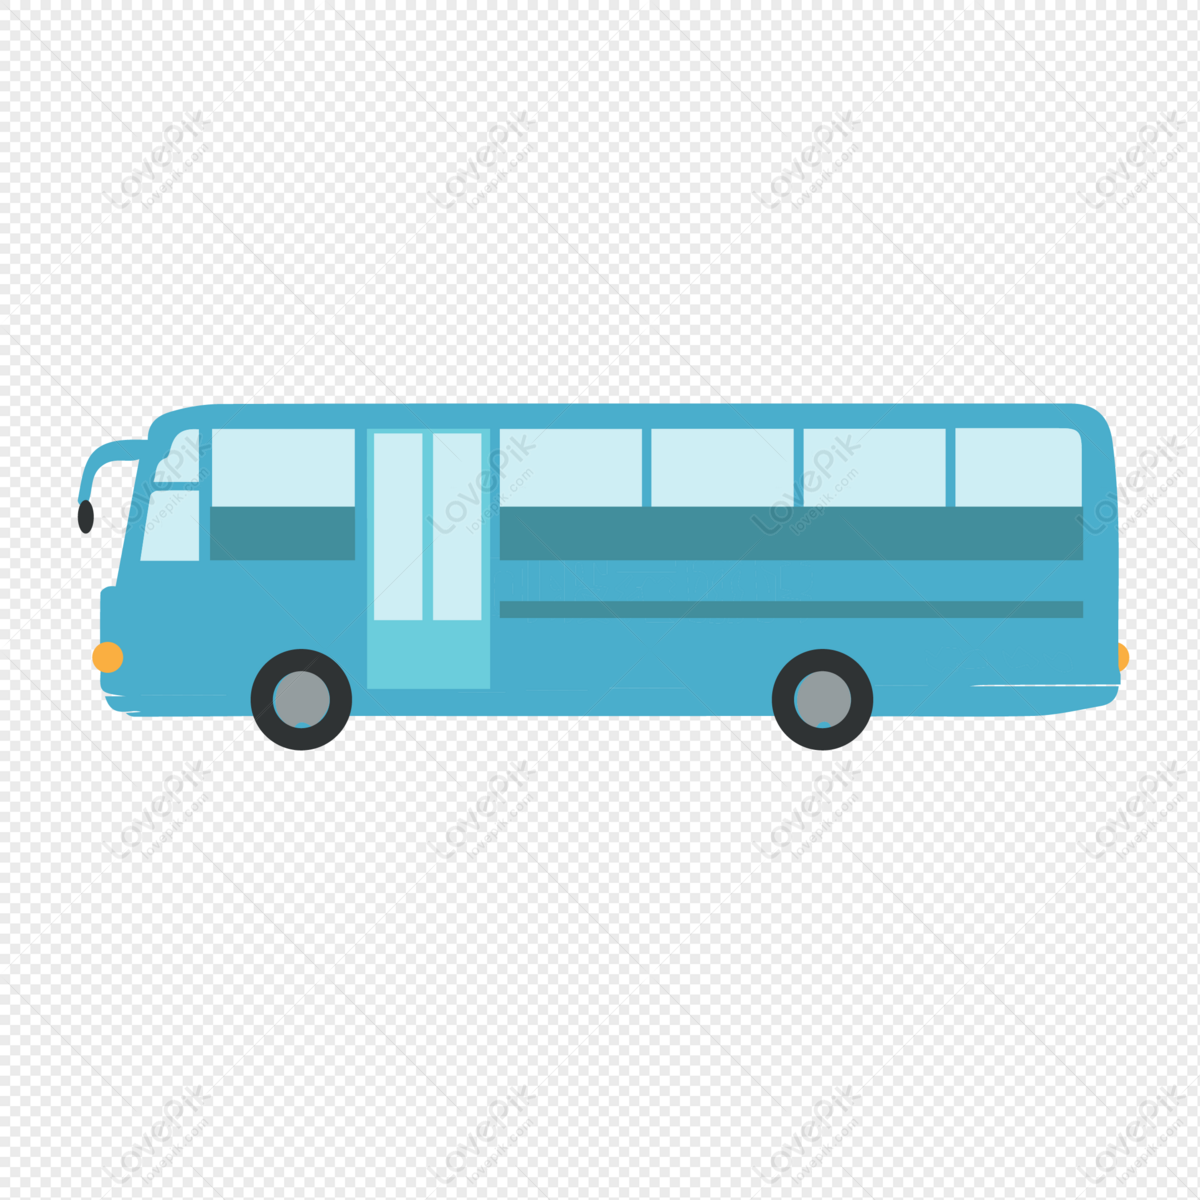 Bus PNG Transparent Background And Clipart Image For Free Download -  Lovepik | 401704670